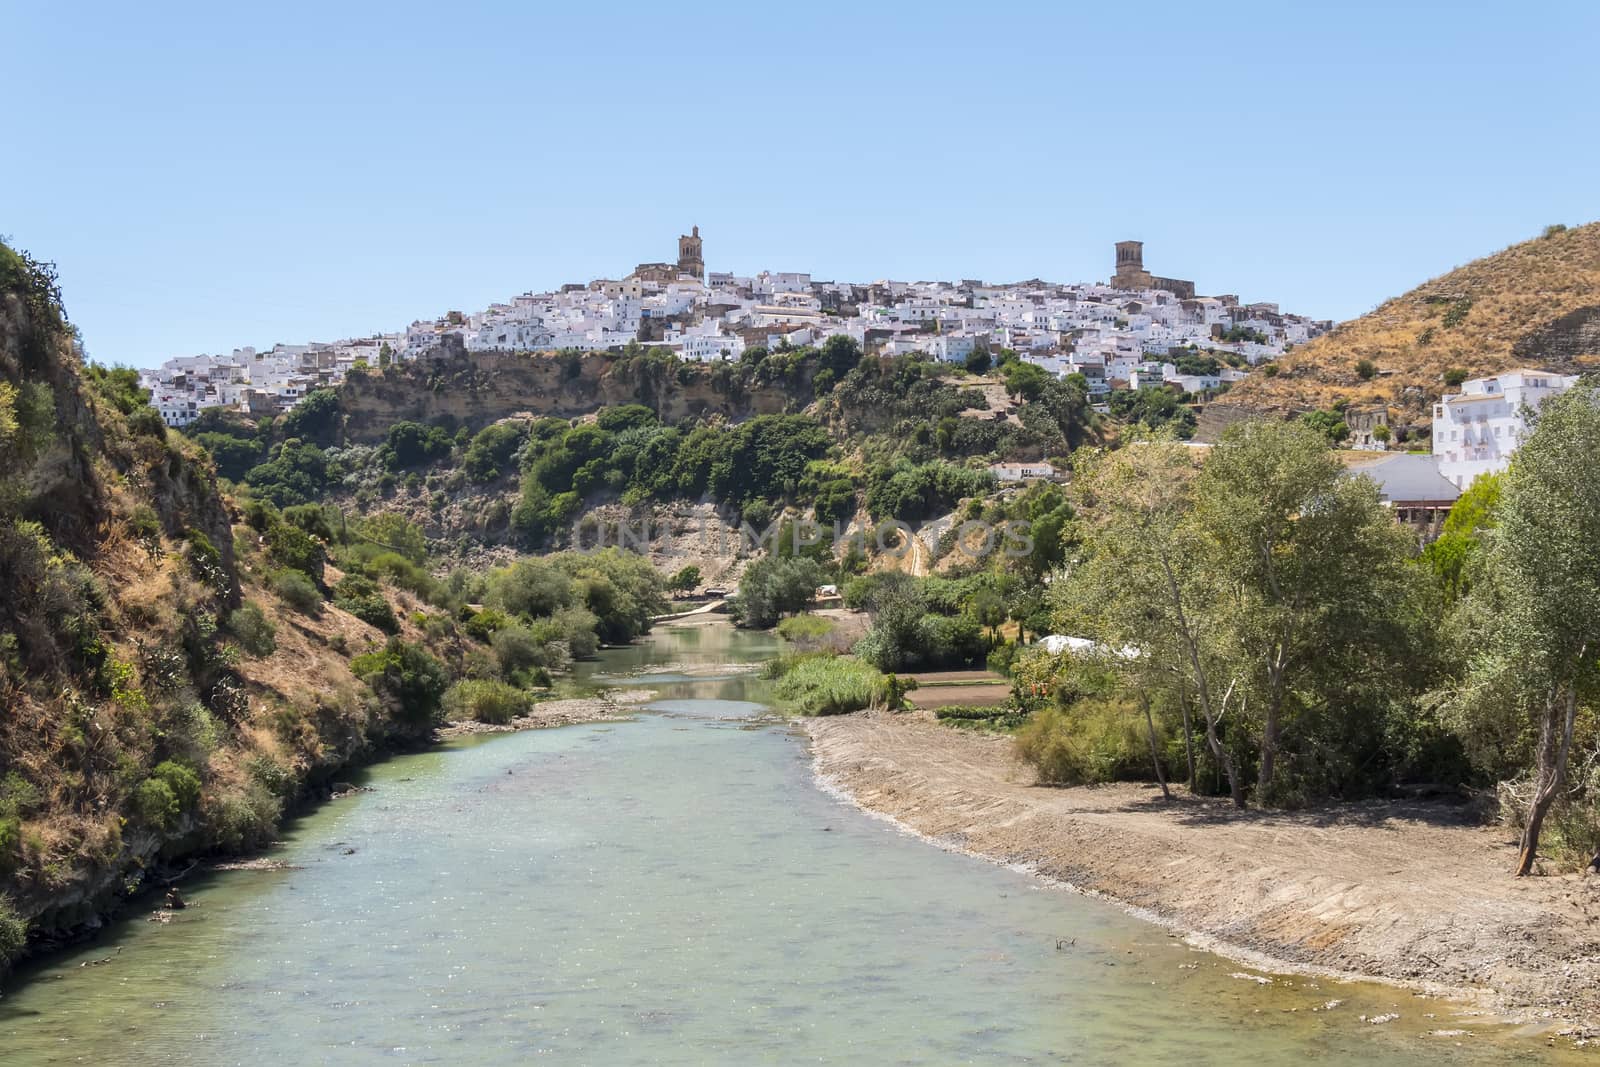 View of Arcos de la Frontera from the river